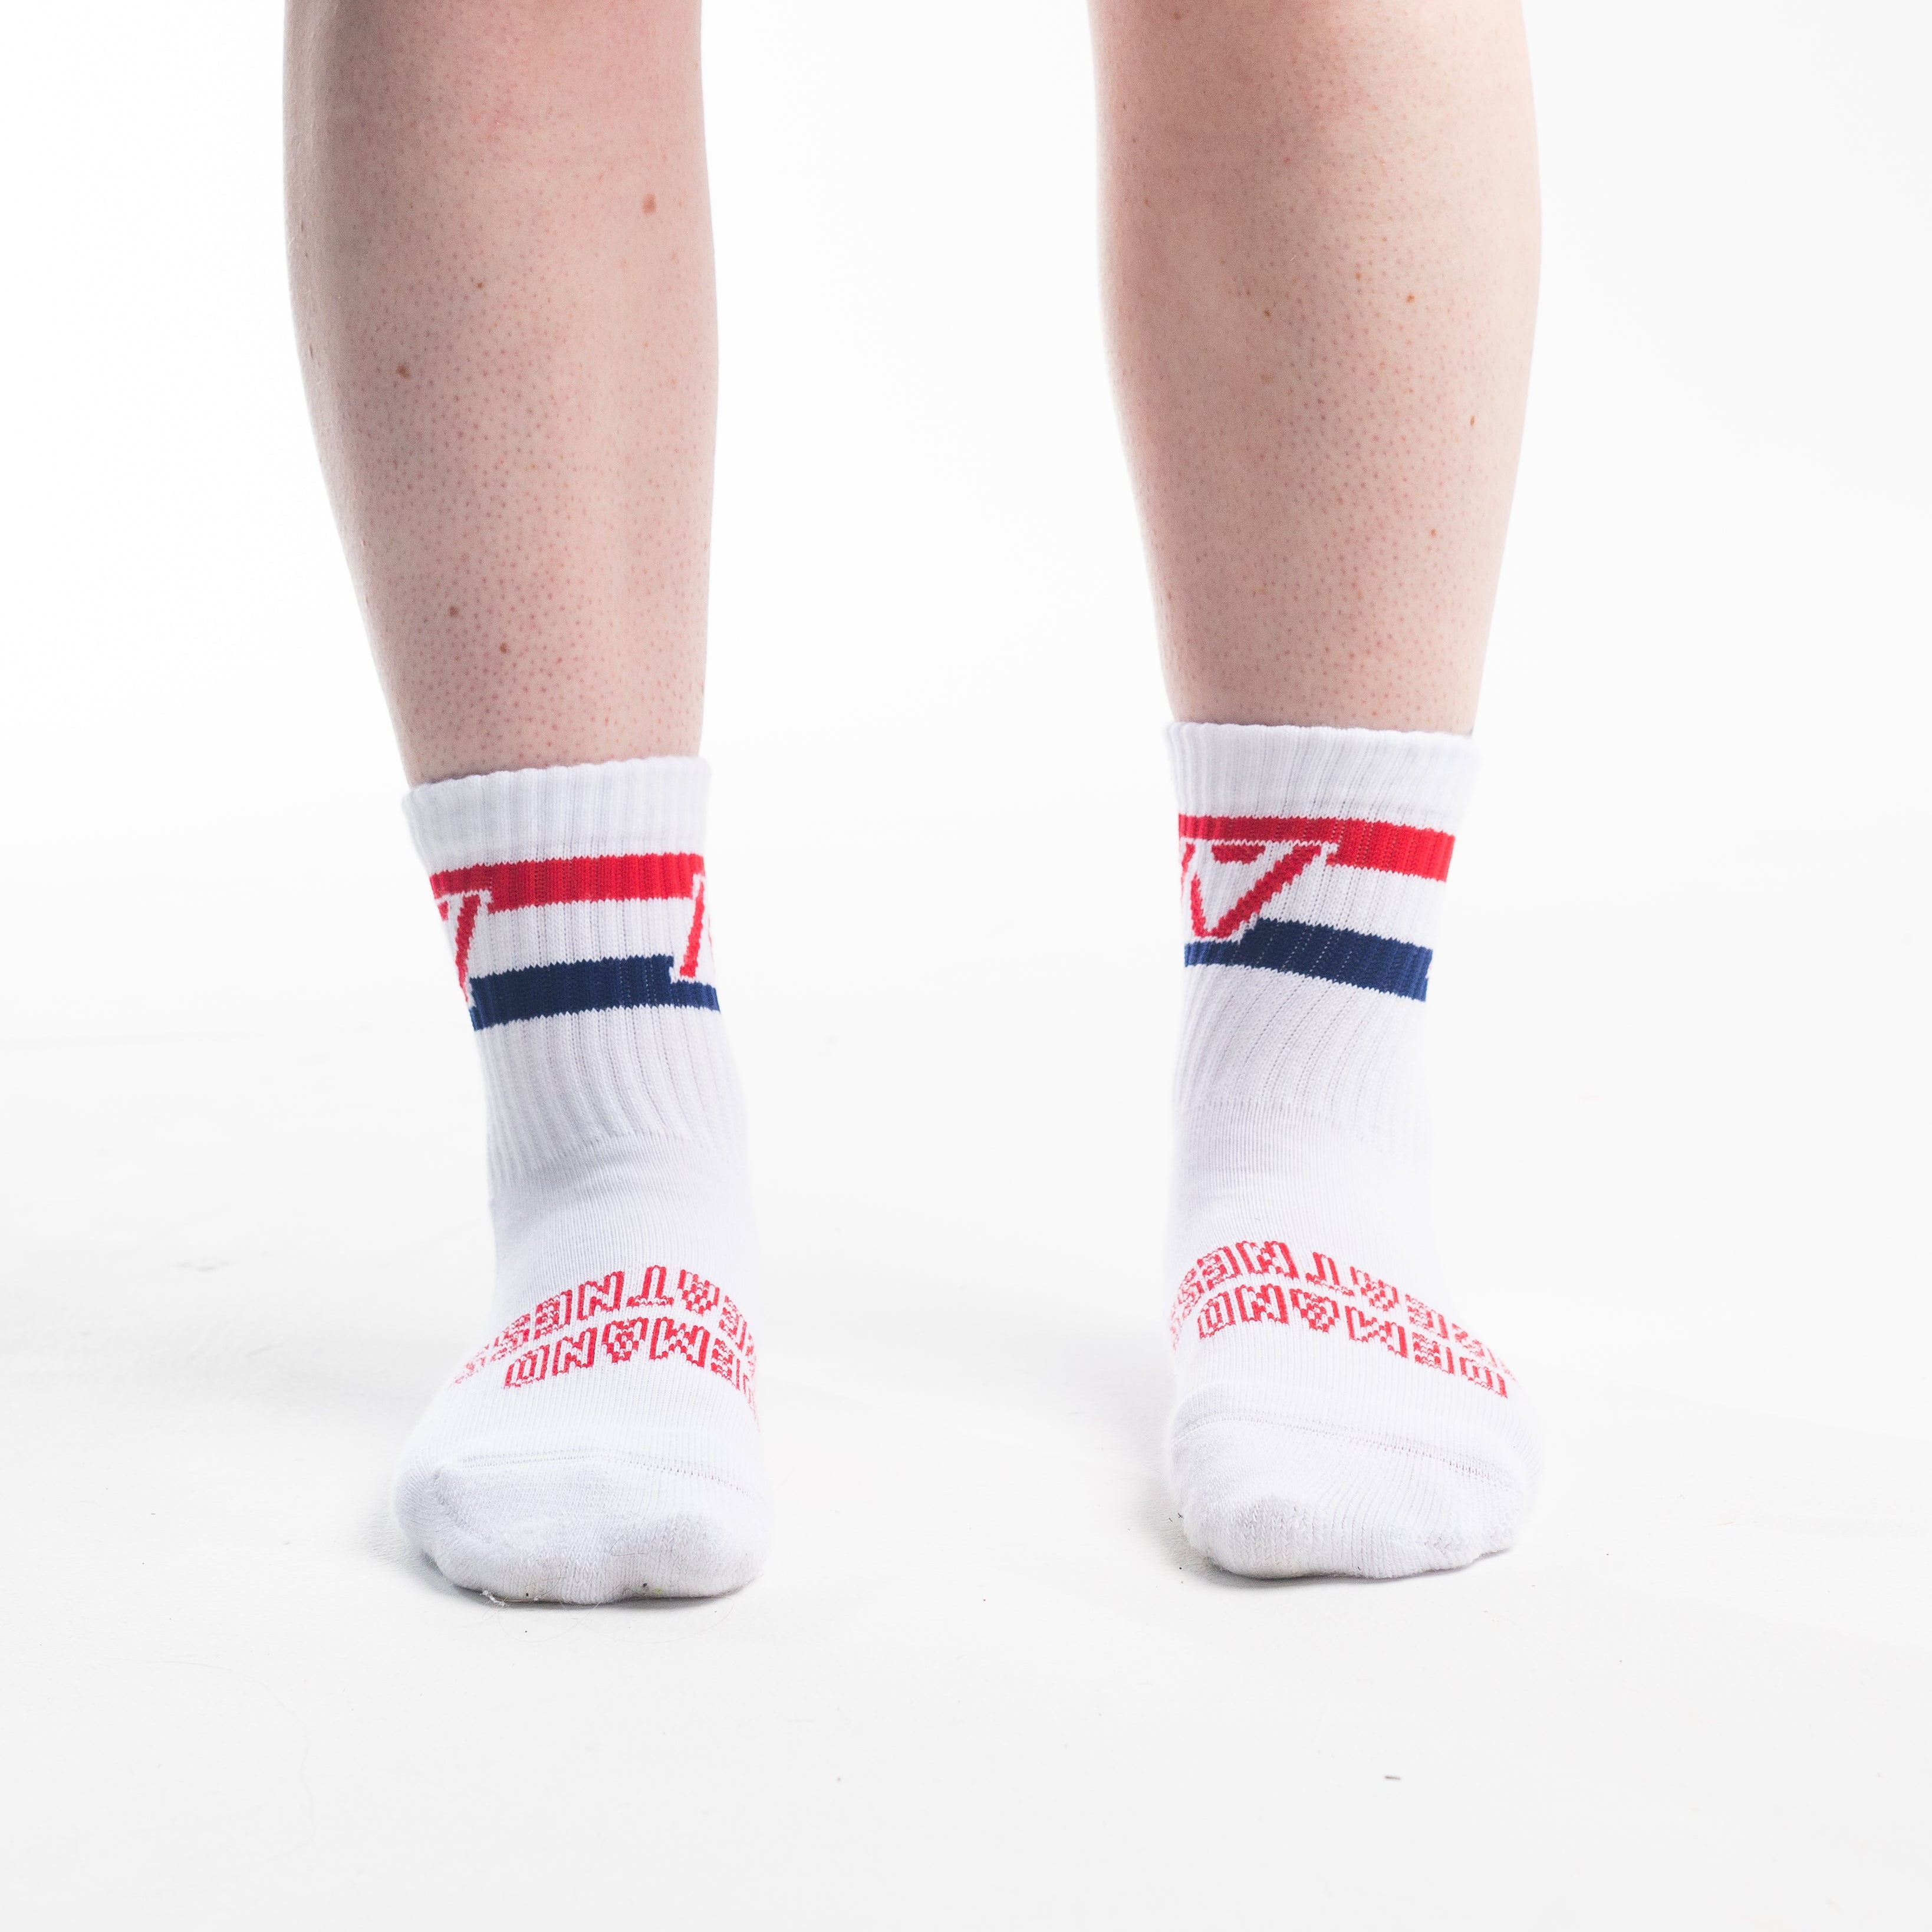 A7 RWB Crew socks showcase red, white and blue logos and let your energy show on the platform, in your training or while out and about. The IPF Approved Night Light Meet Kit includes Powerlifting Singlet, A7 Meet Shirt, A7 Zebra Wrist Wraps, A7 Deadlift Socks, Hourglass Knee Sleeves (Stiff Knee Sleeves and Rigor Mortis Knee Sleeves). All A7 Powerlifting Equipment shipping to UK, Norway, Switzerland 